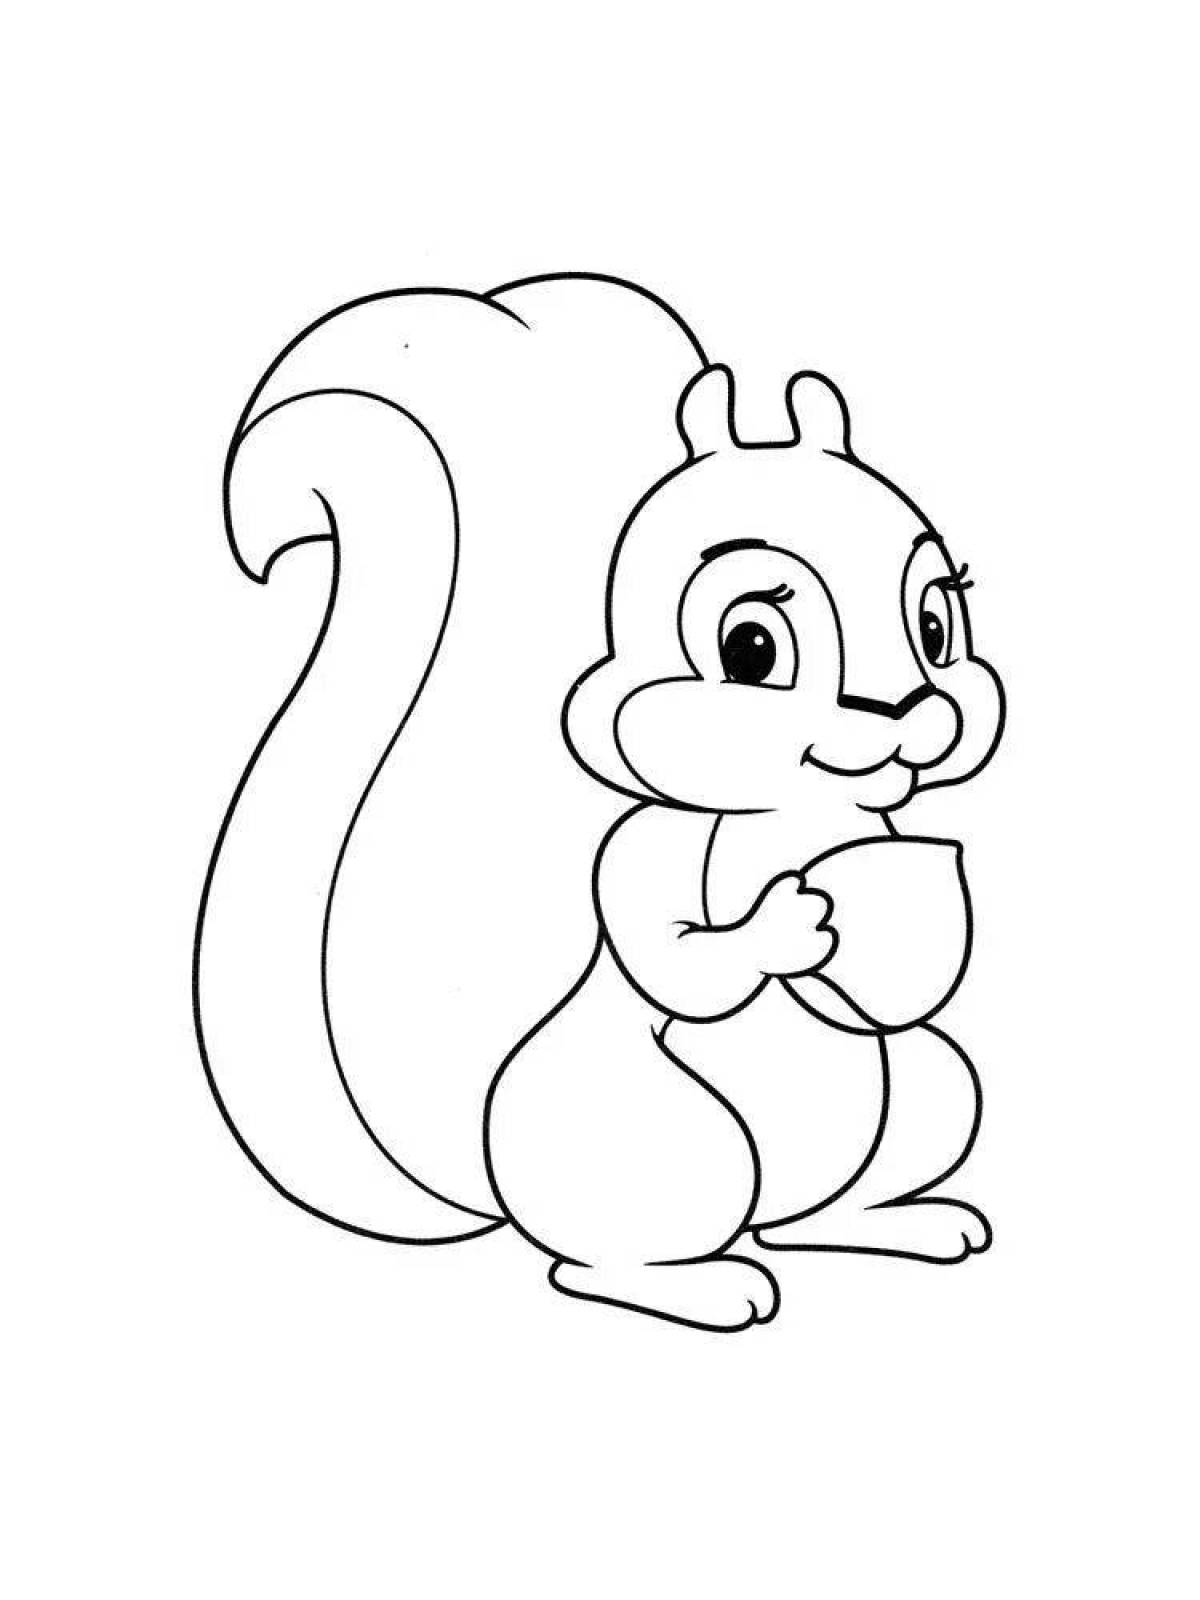 Watchful squirrel coloring page